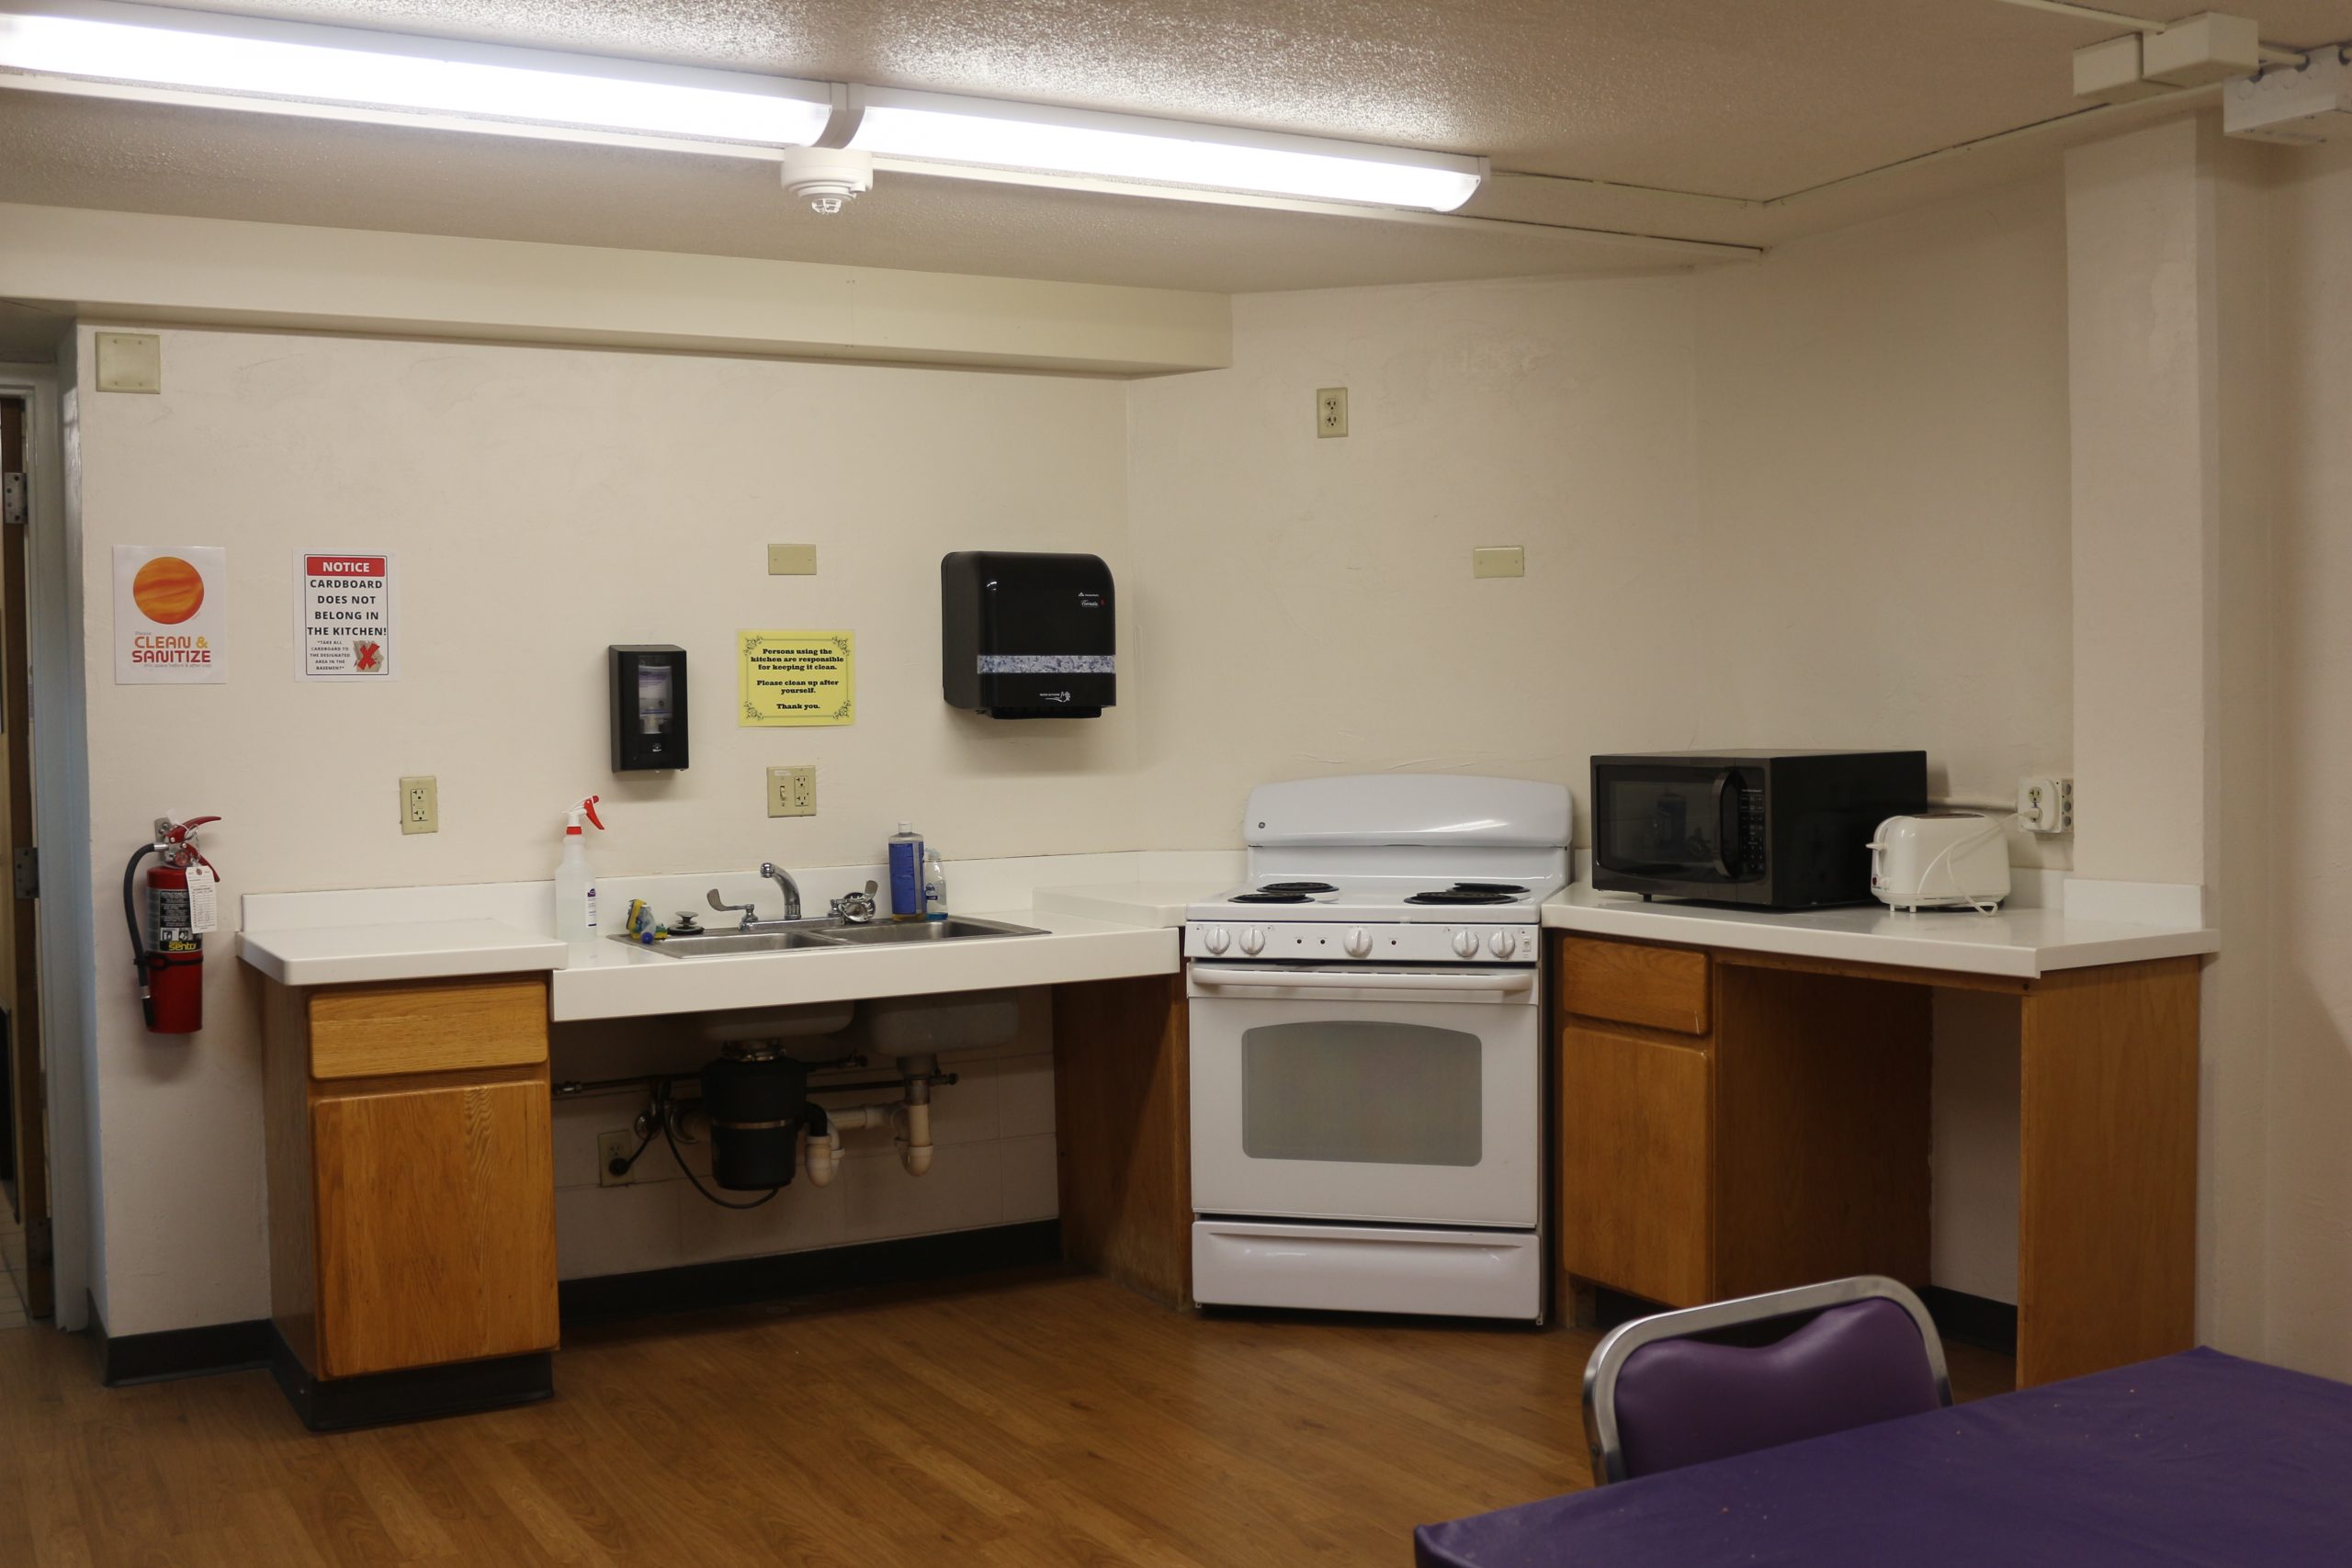 Full kitchen in residence hall with all appliances